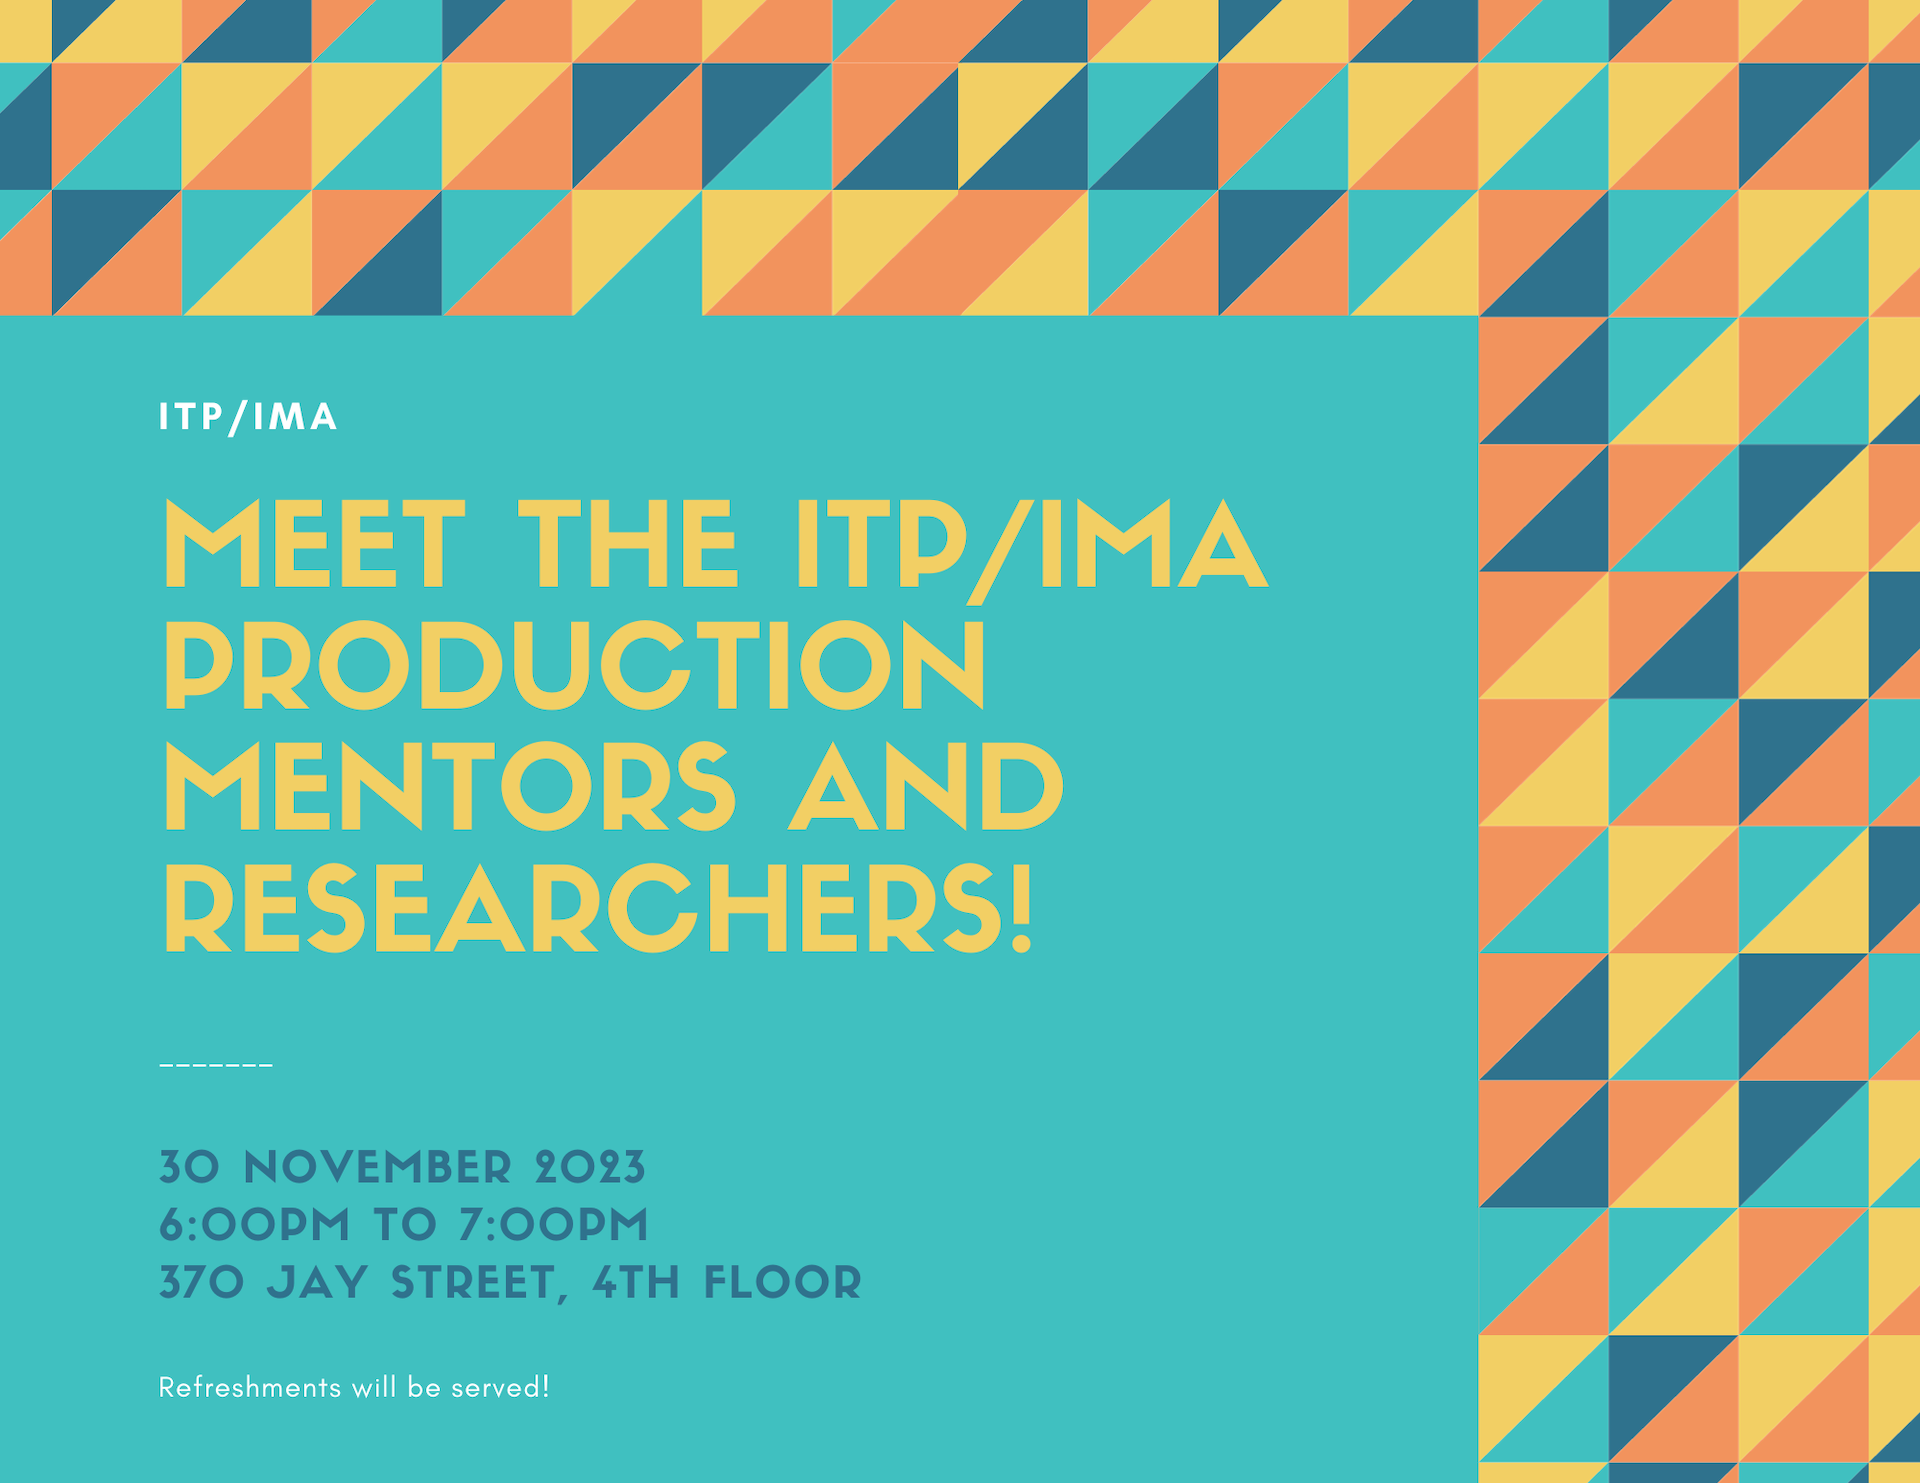  Meet the itp/ima pRODUCTION MENTORS and rESEARCHERS! ------- ITP/IMA Refreshments will be served! 30 NOVEMBER 2023 6:00PM TO 7:00PM 370 JAY STREET, 4TH FLOOR